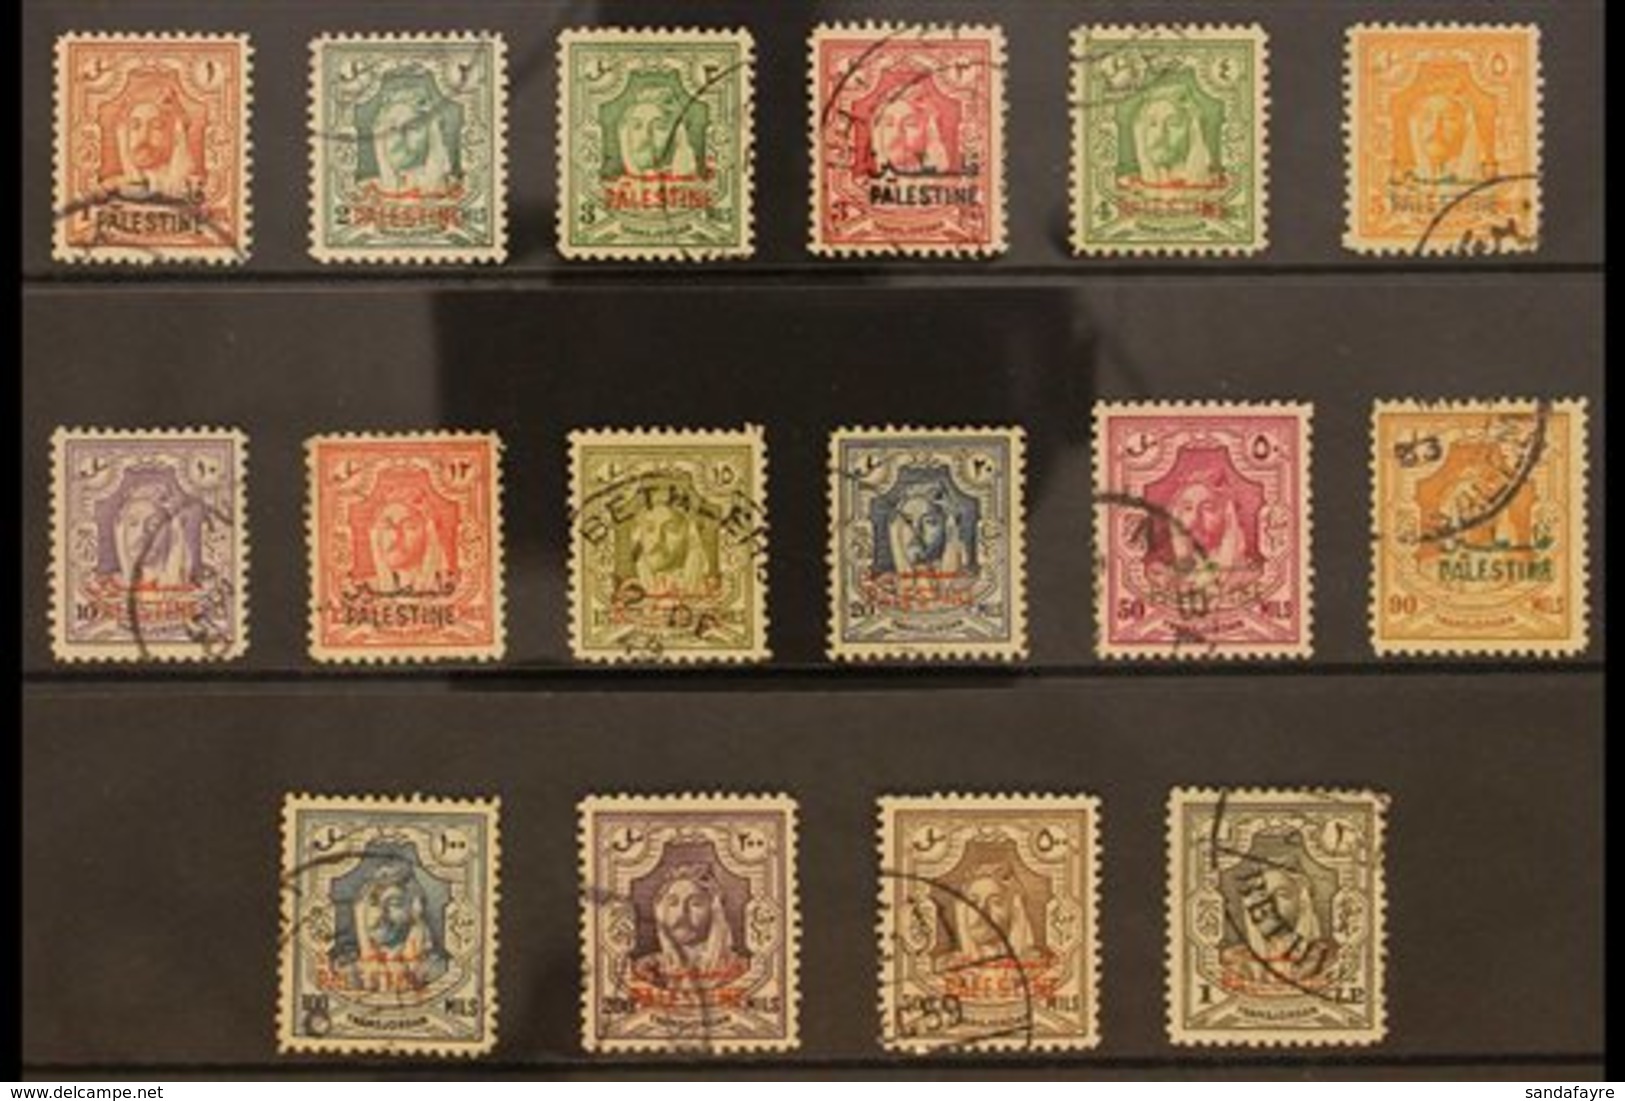 OCCUPATION OF PALESTINE 1948 Jordan Stamps Opt'd "PALESTINE", SG P1/16, Very Fine Used (16 Stamps) For More Images, Plea - Jordanie